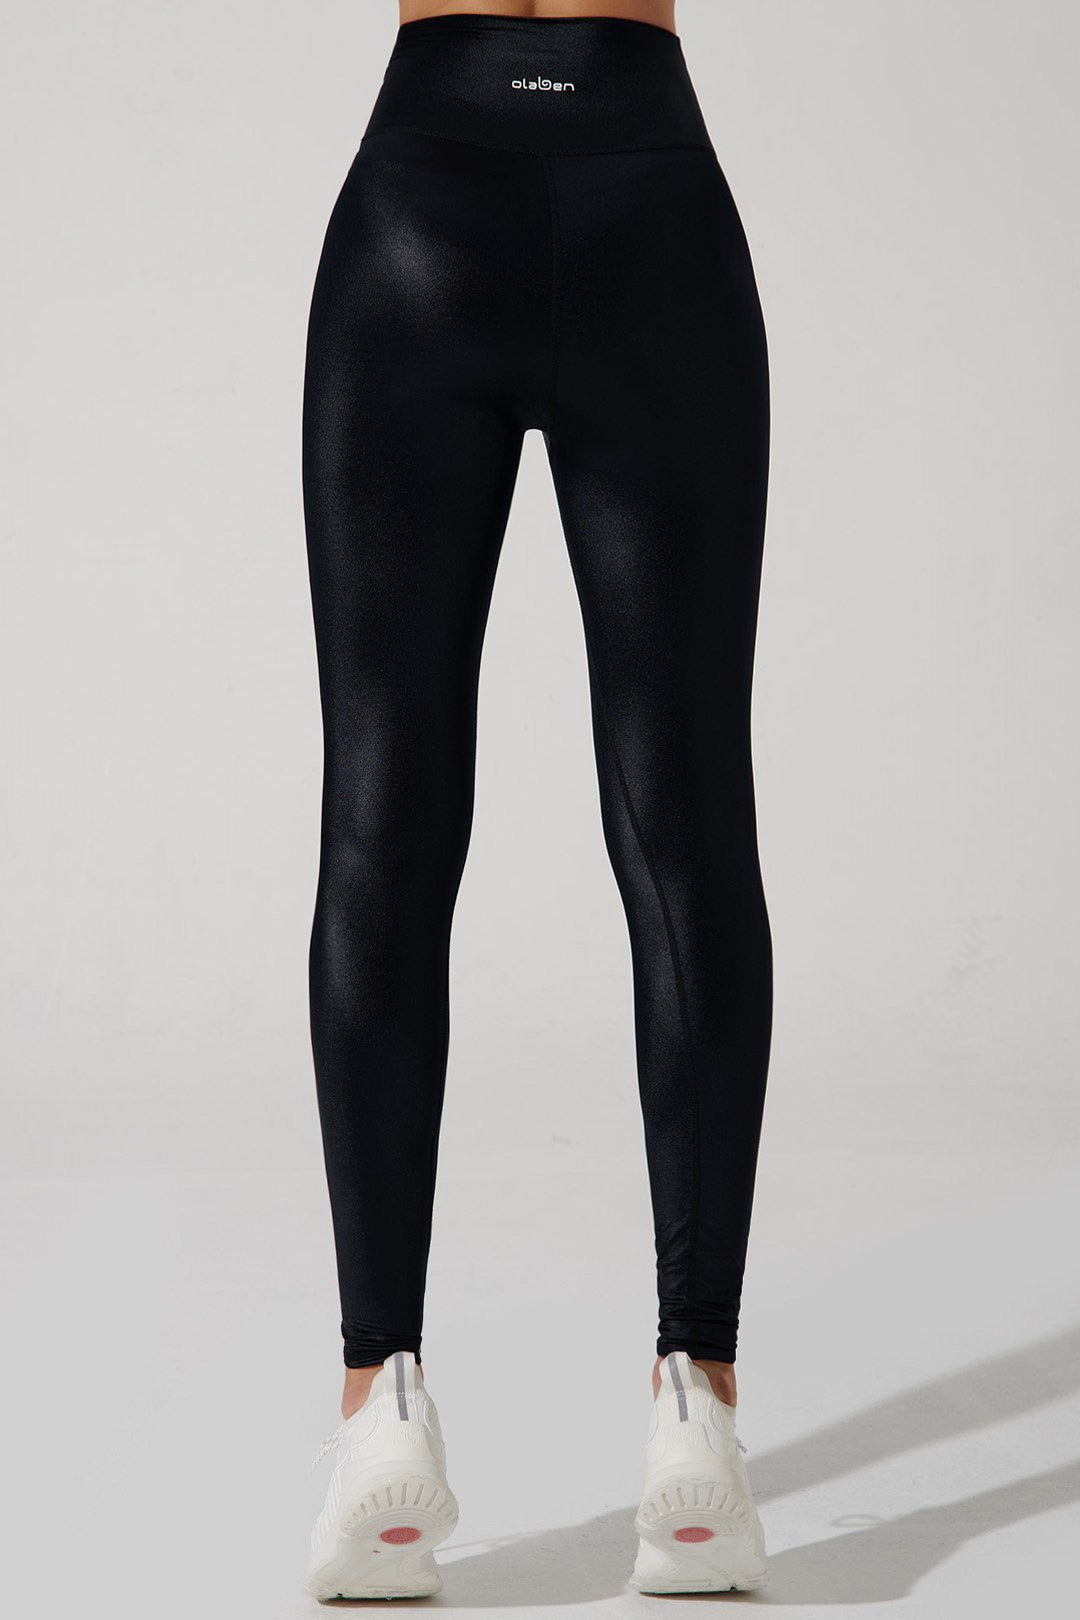 Stylish high-waisted women's leggings in jet black color - perfect for any occasion.